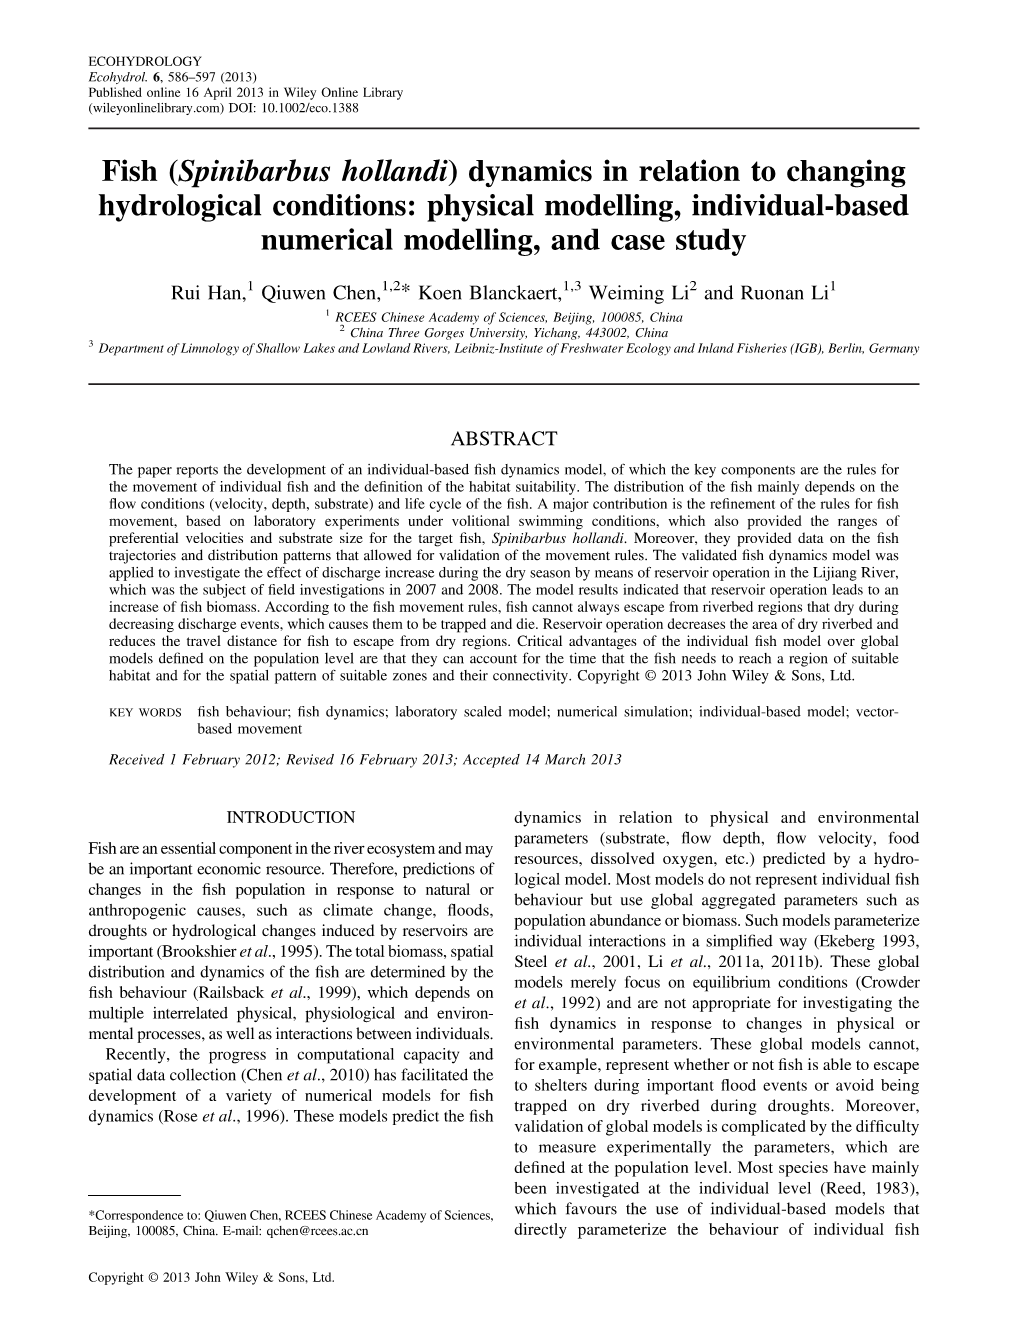 Fish (Spinibarbus Hollandi) Dynamics in Relation to Changing Hydrological Conditions: Physical Modelling, Individual-Based Numerical Modelling, and Case Study